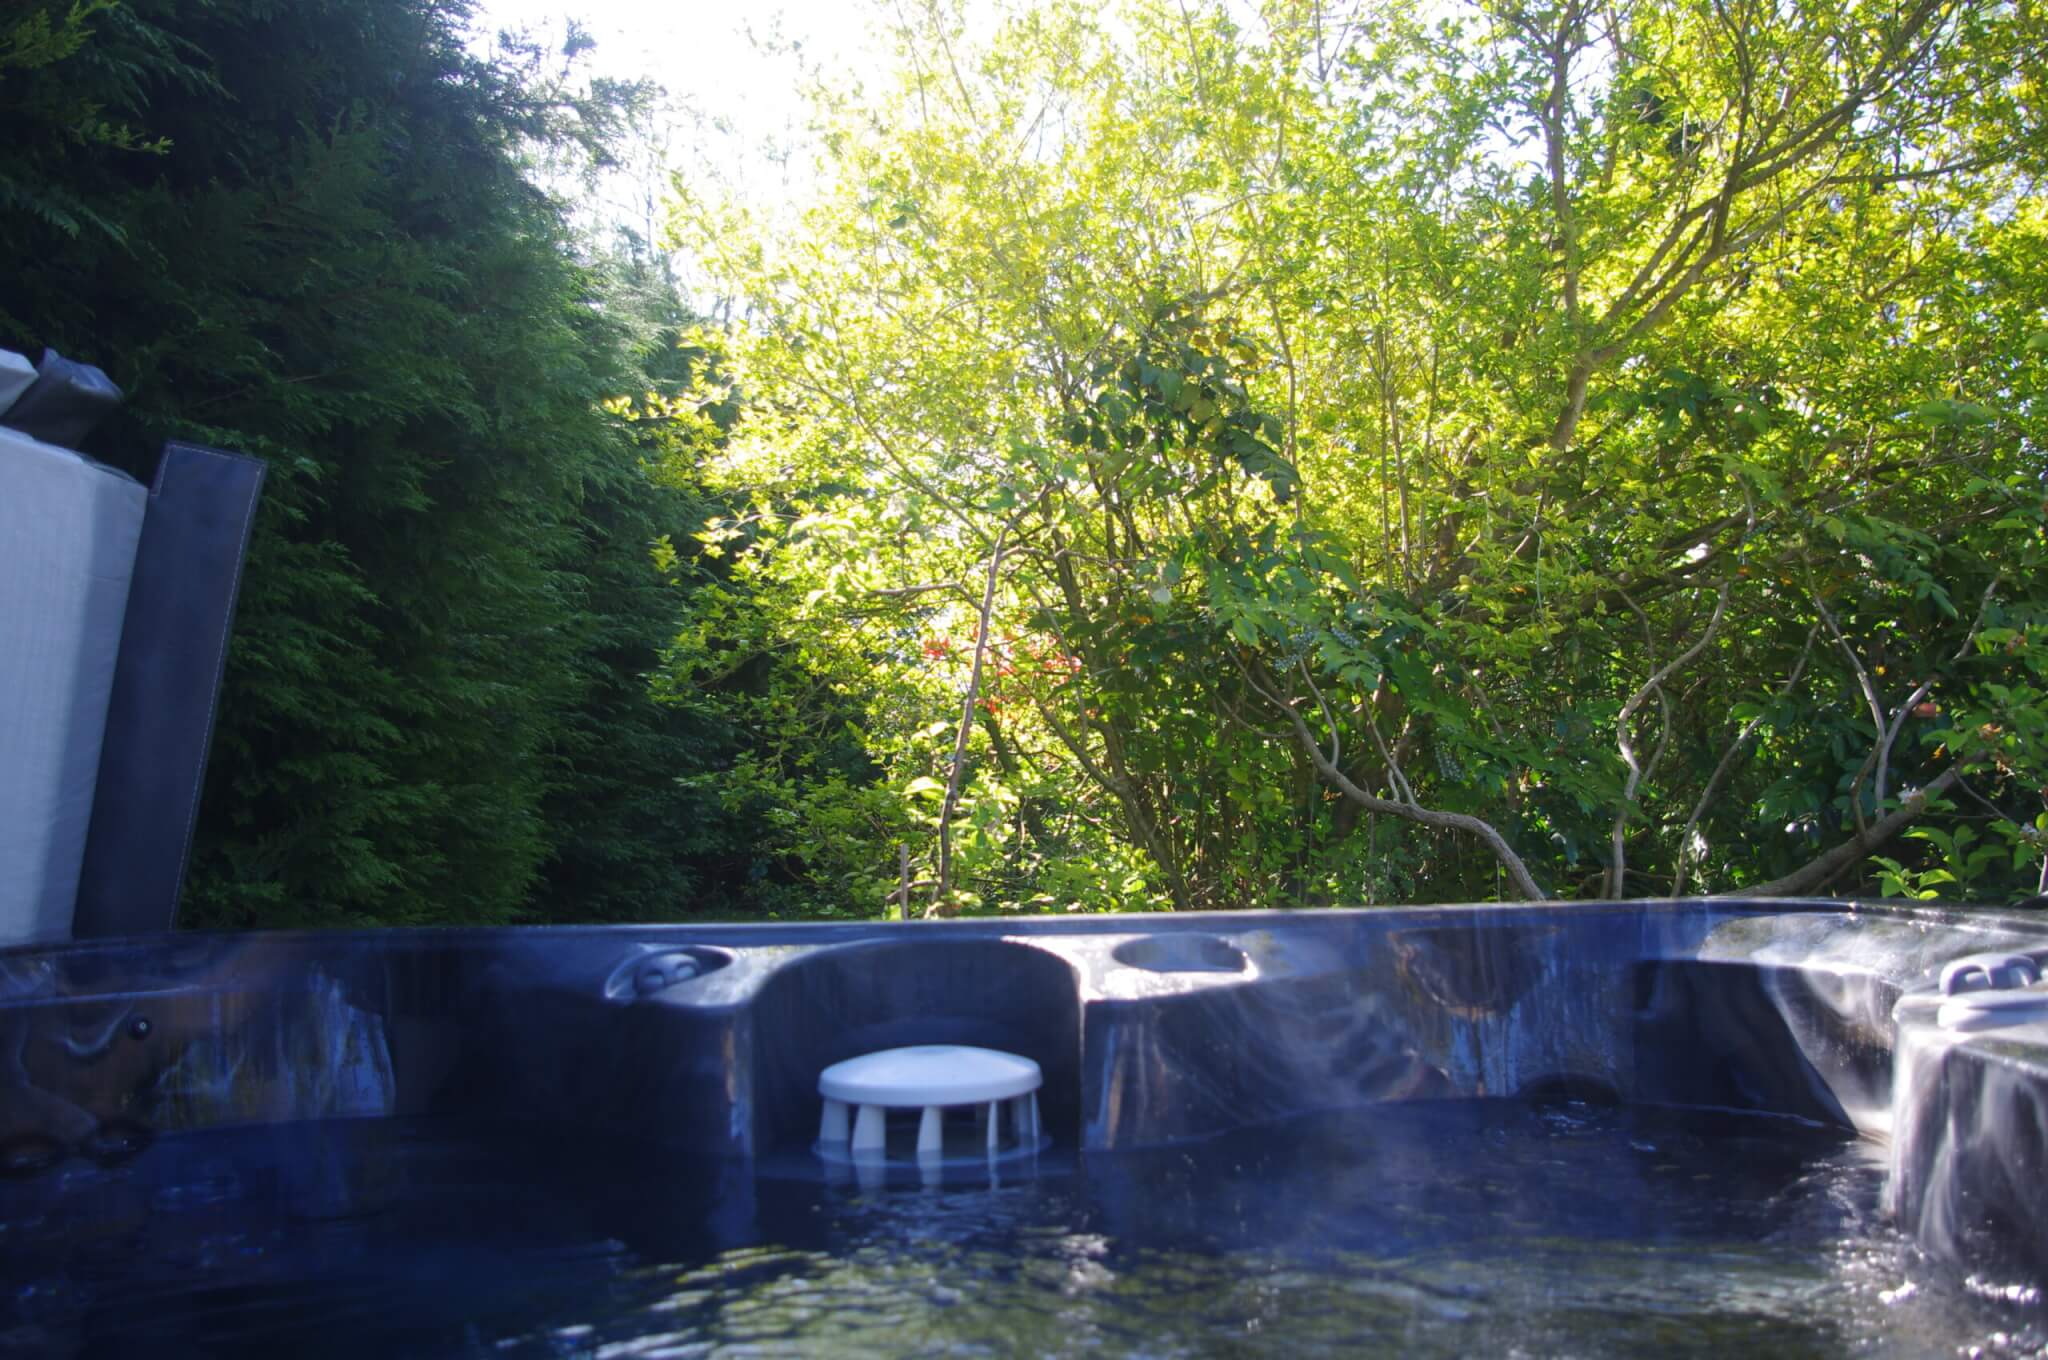 The Hot Tub In Rainbow Cottage's garden